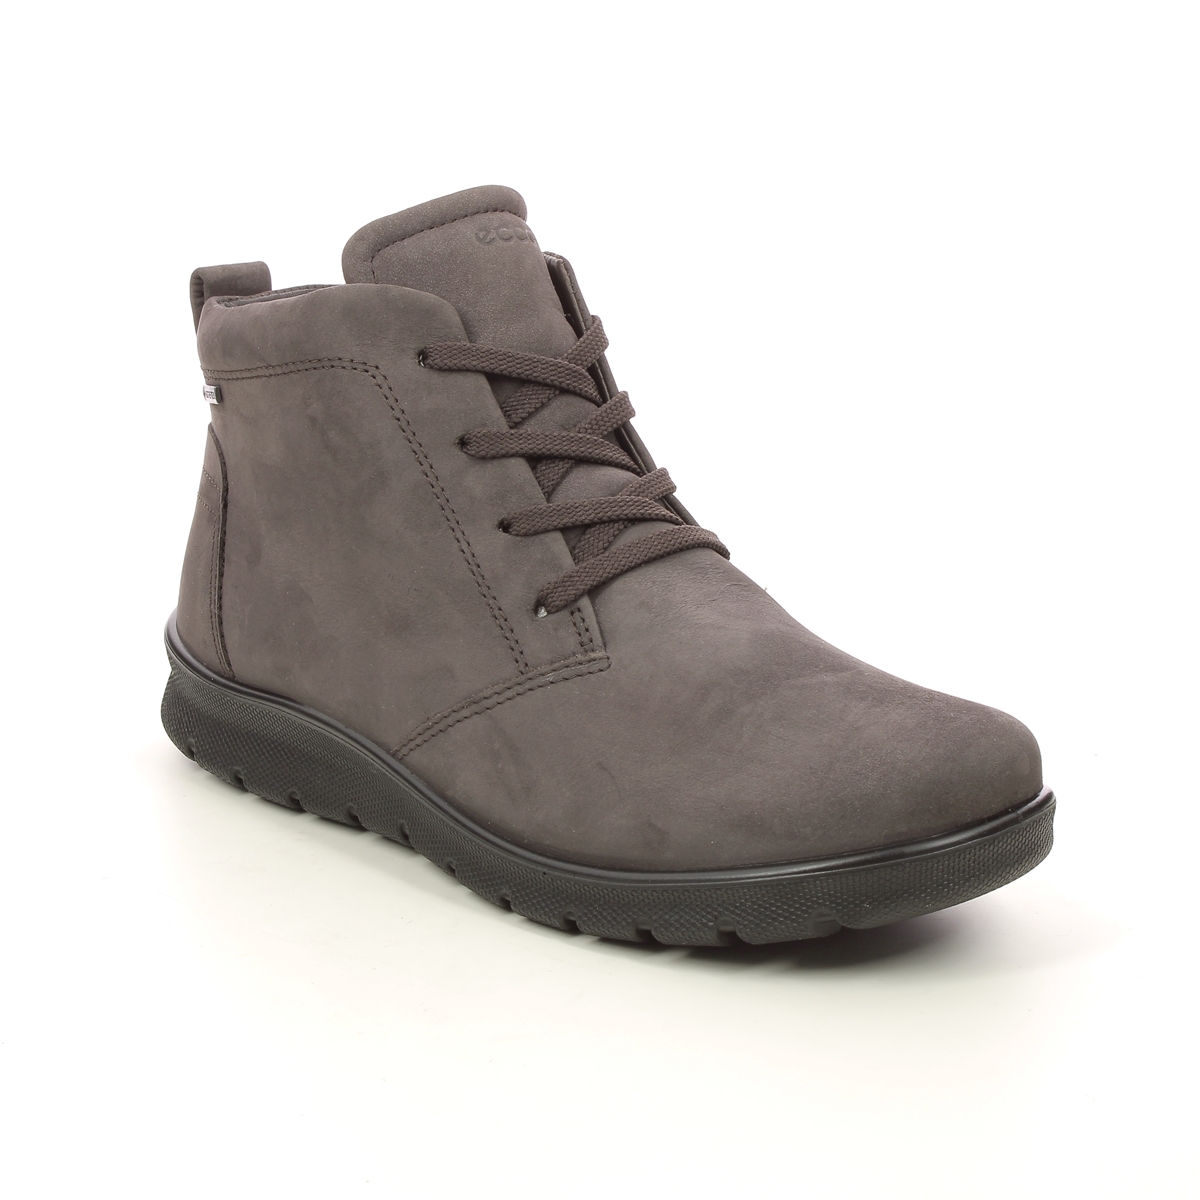 Ecco Babett Lo Gtx Brown Nubuck Womens Lace Up Boots 215583-02576 In Size 36 In Plain Brown Nubuck